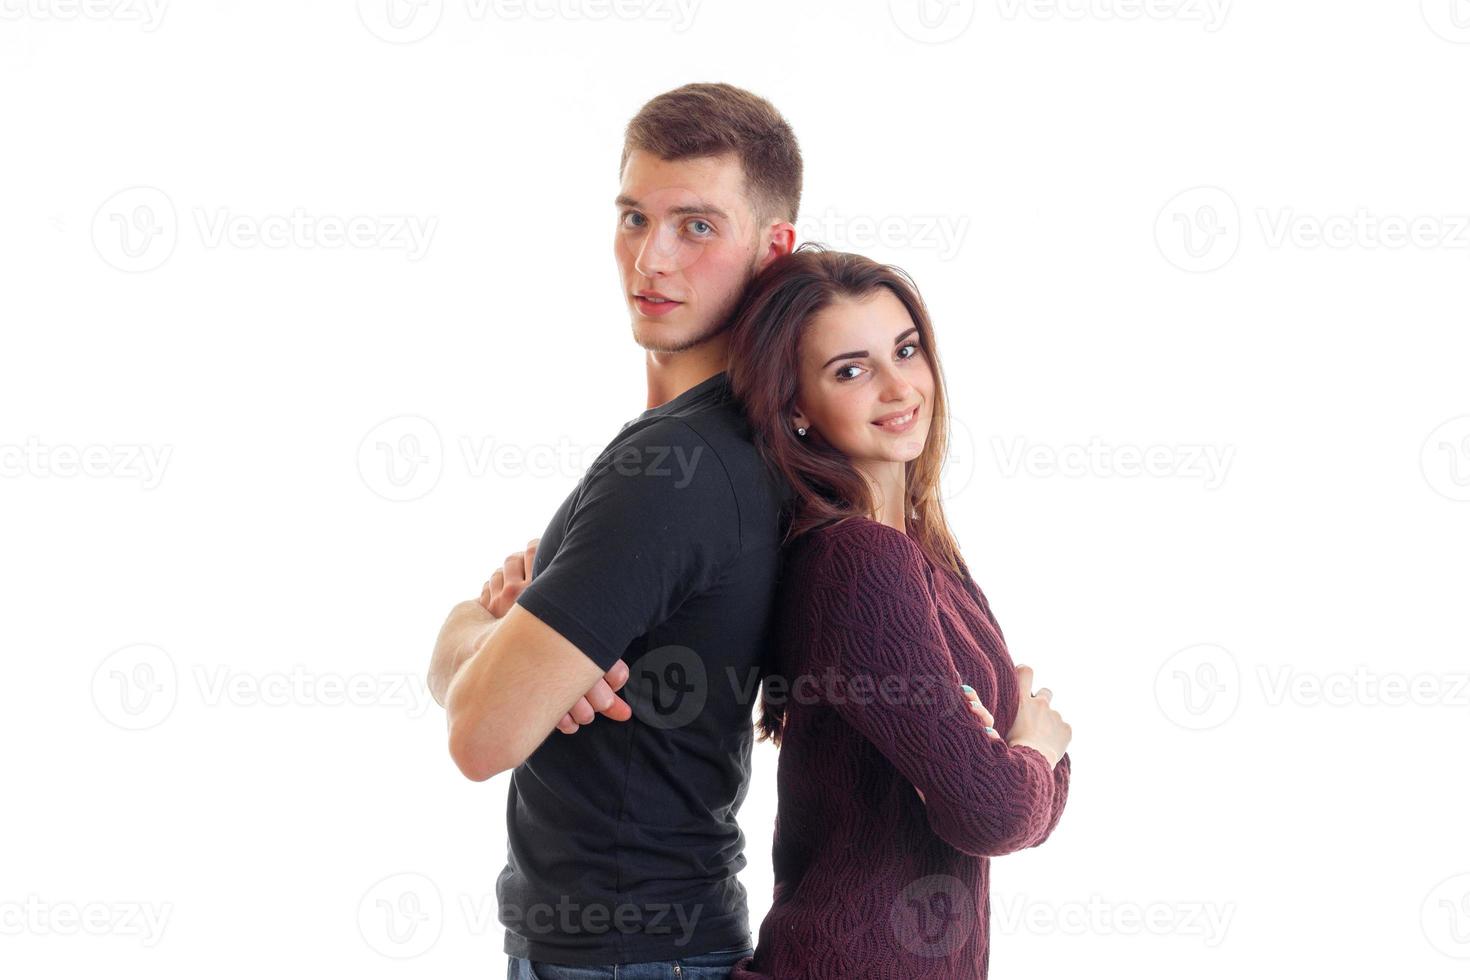 smiling pin-up girl is standing next to a high cute guy back to back photo